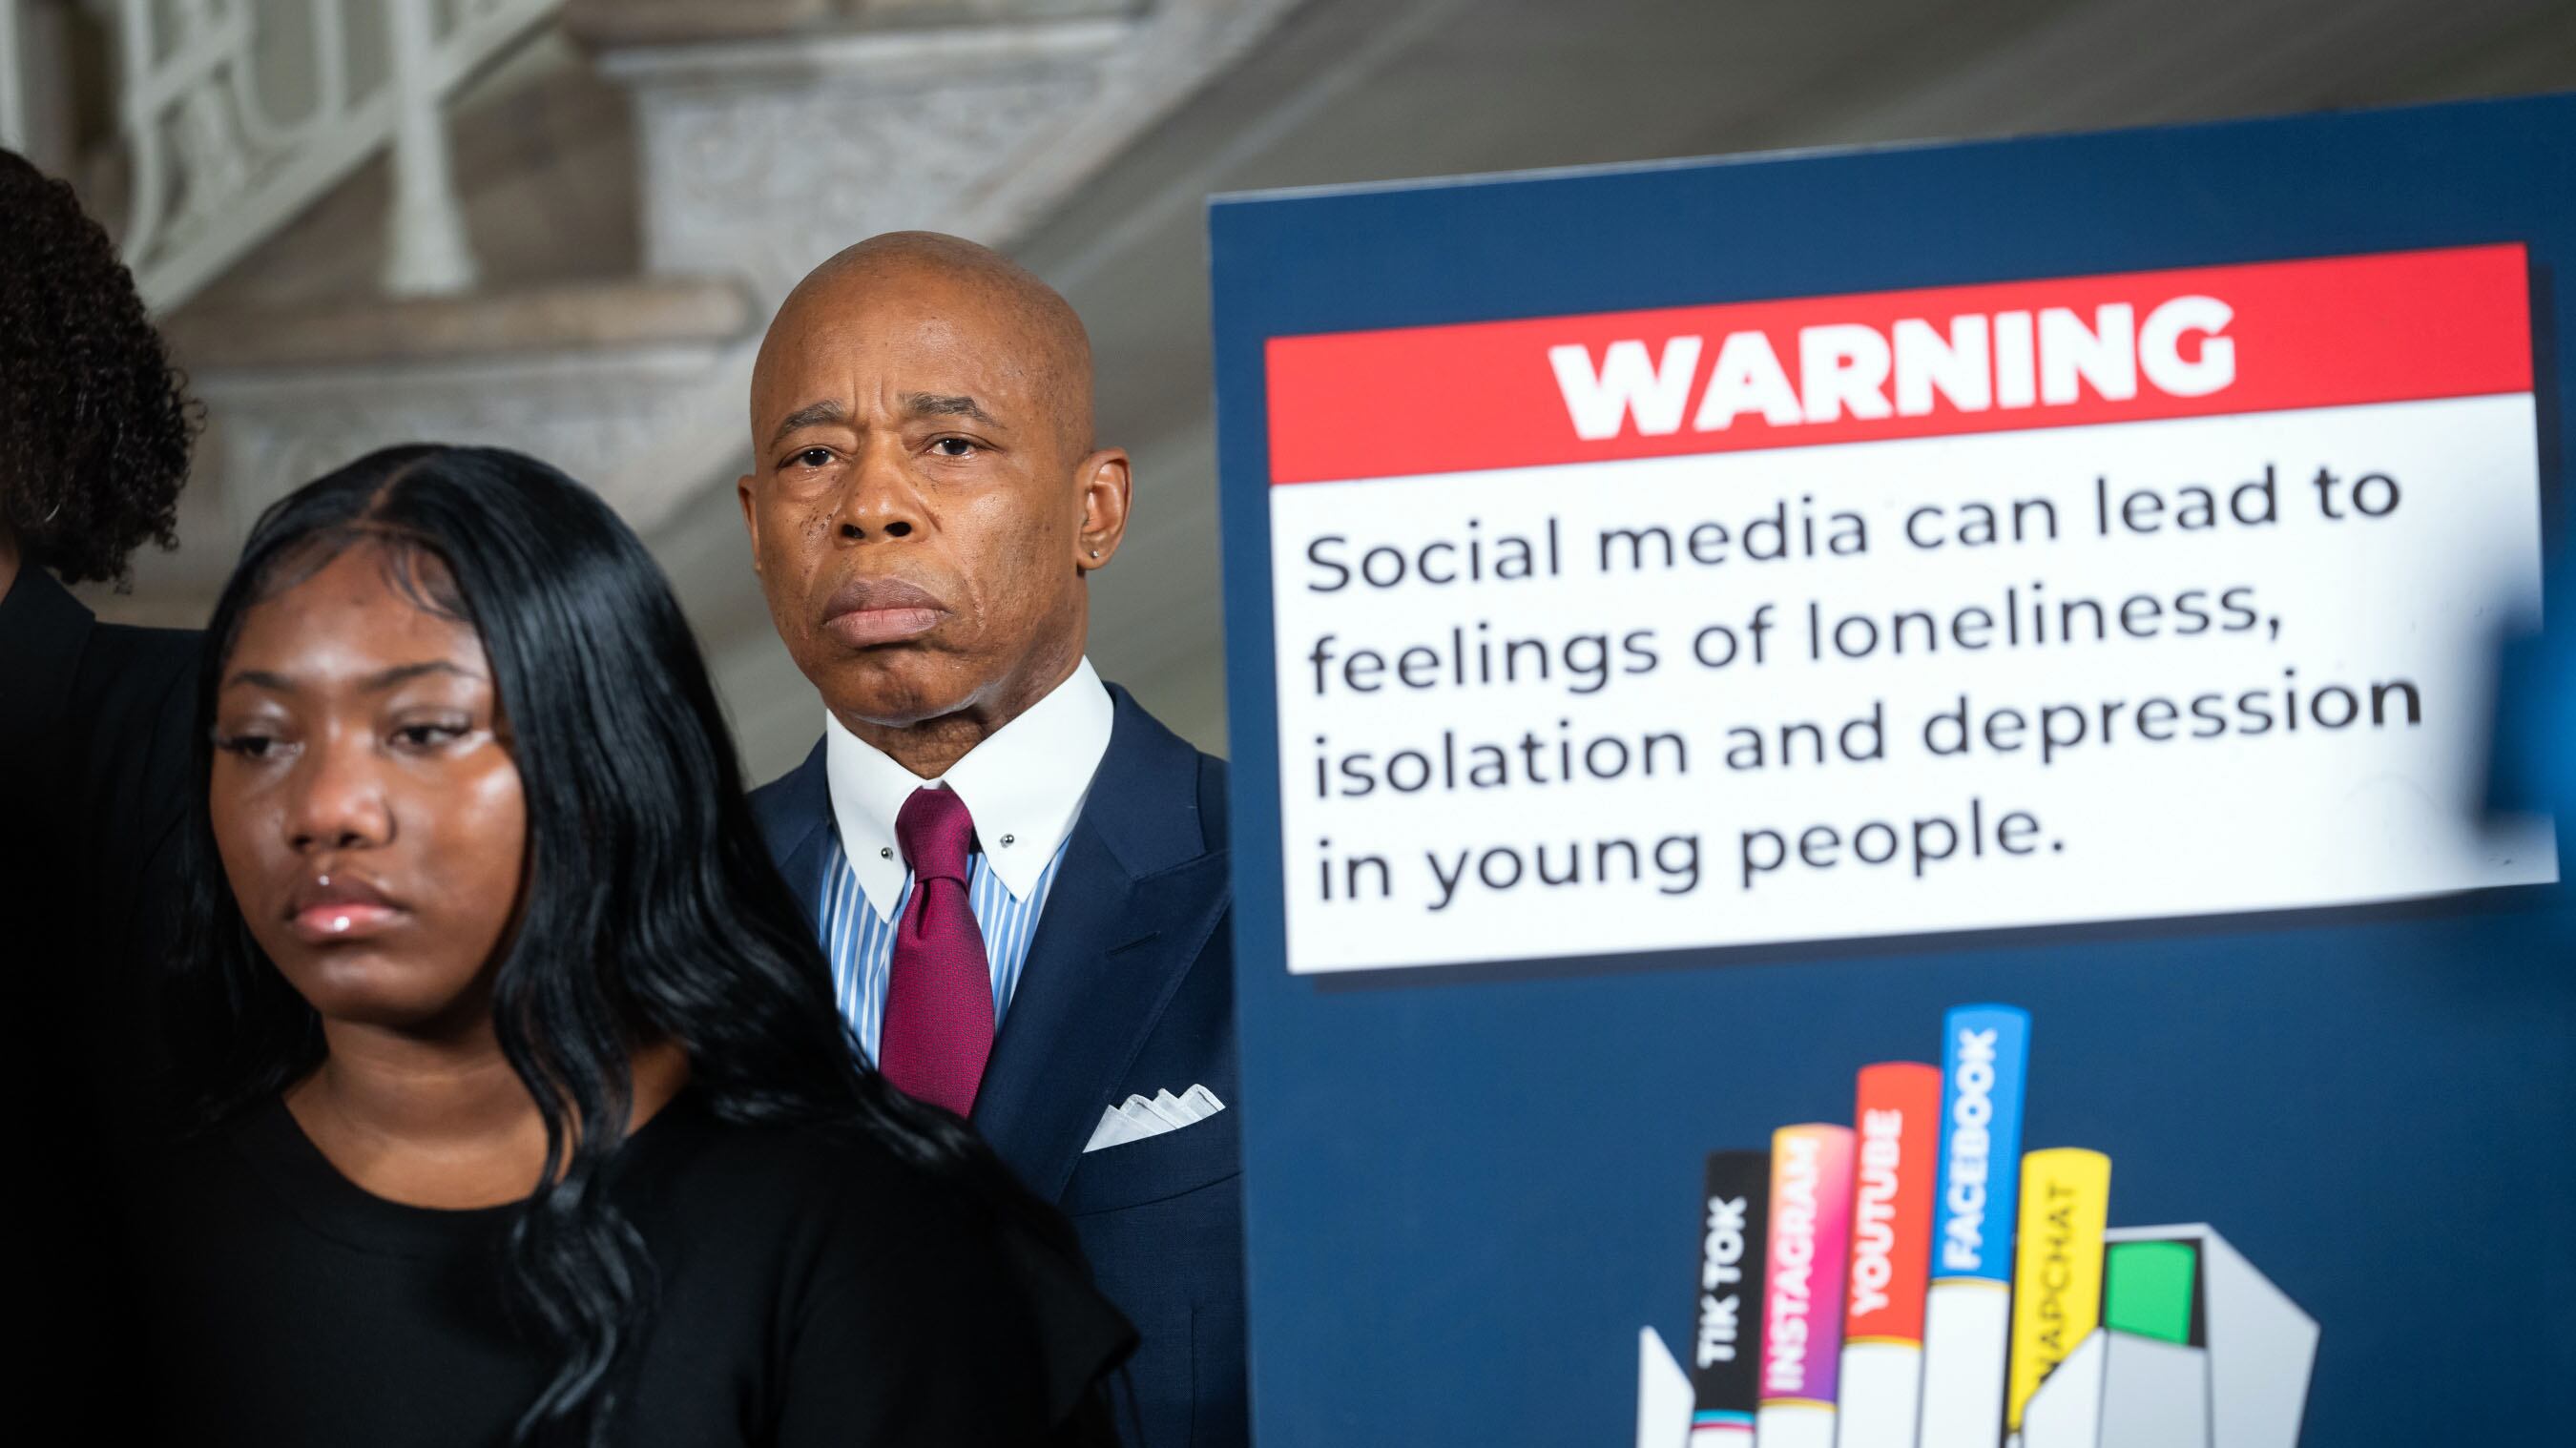 A man in a suit and tie stands next to a sign with health warnings about social media.